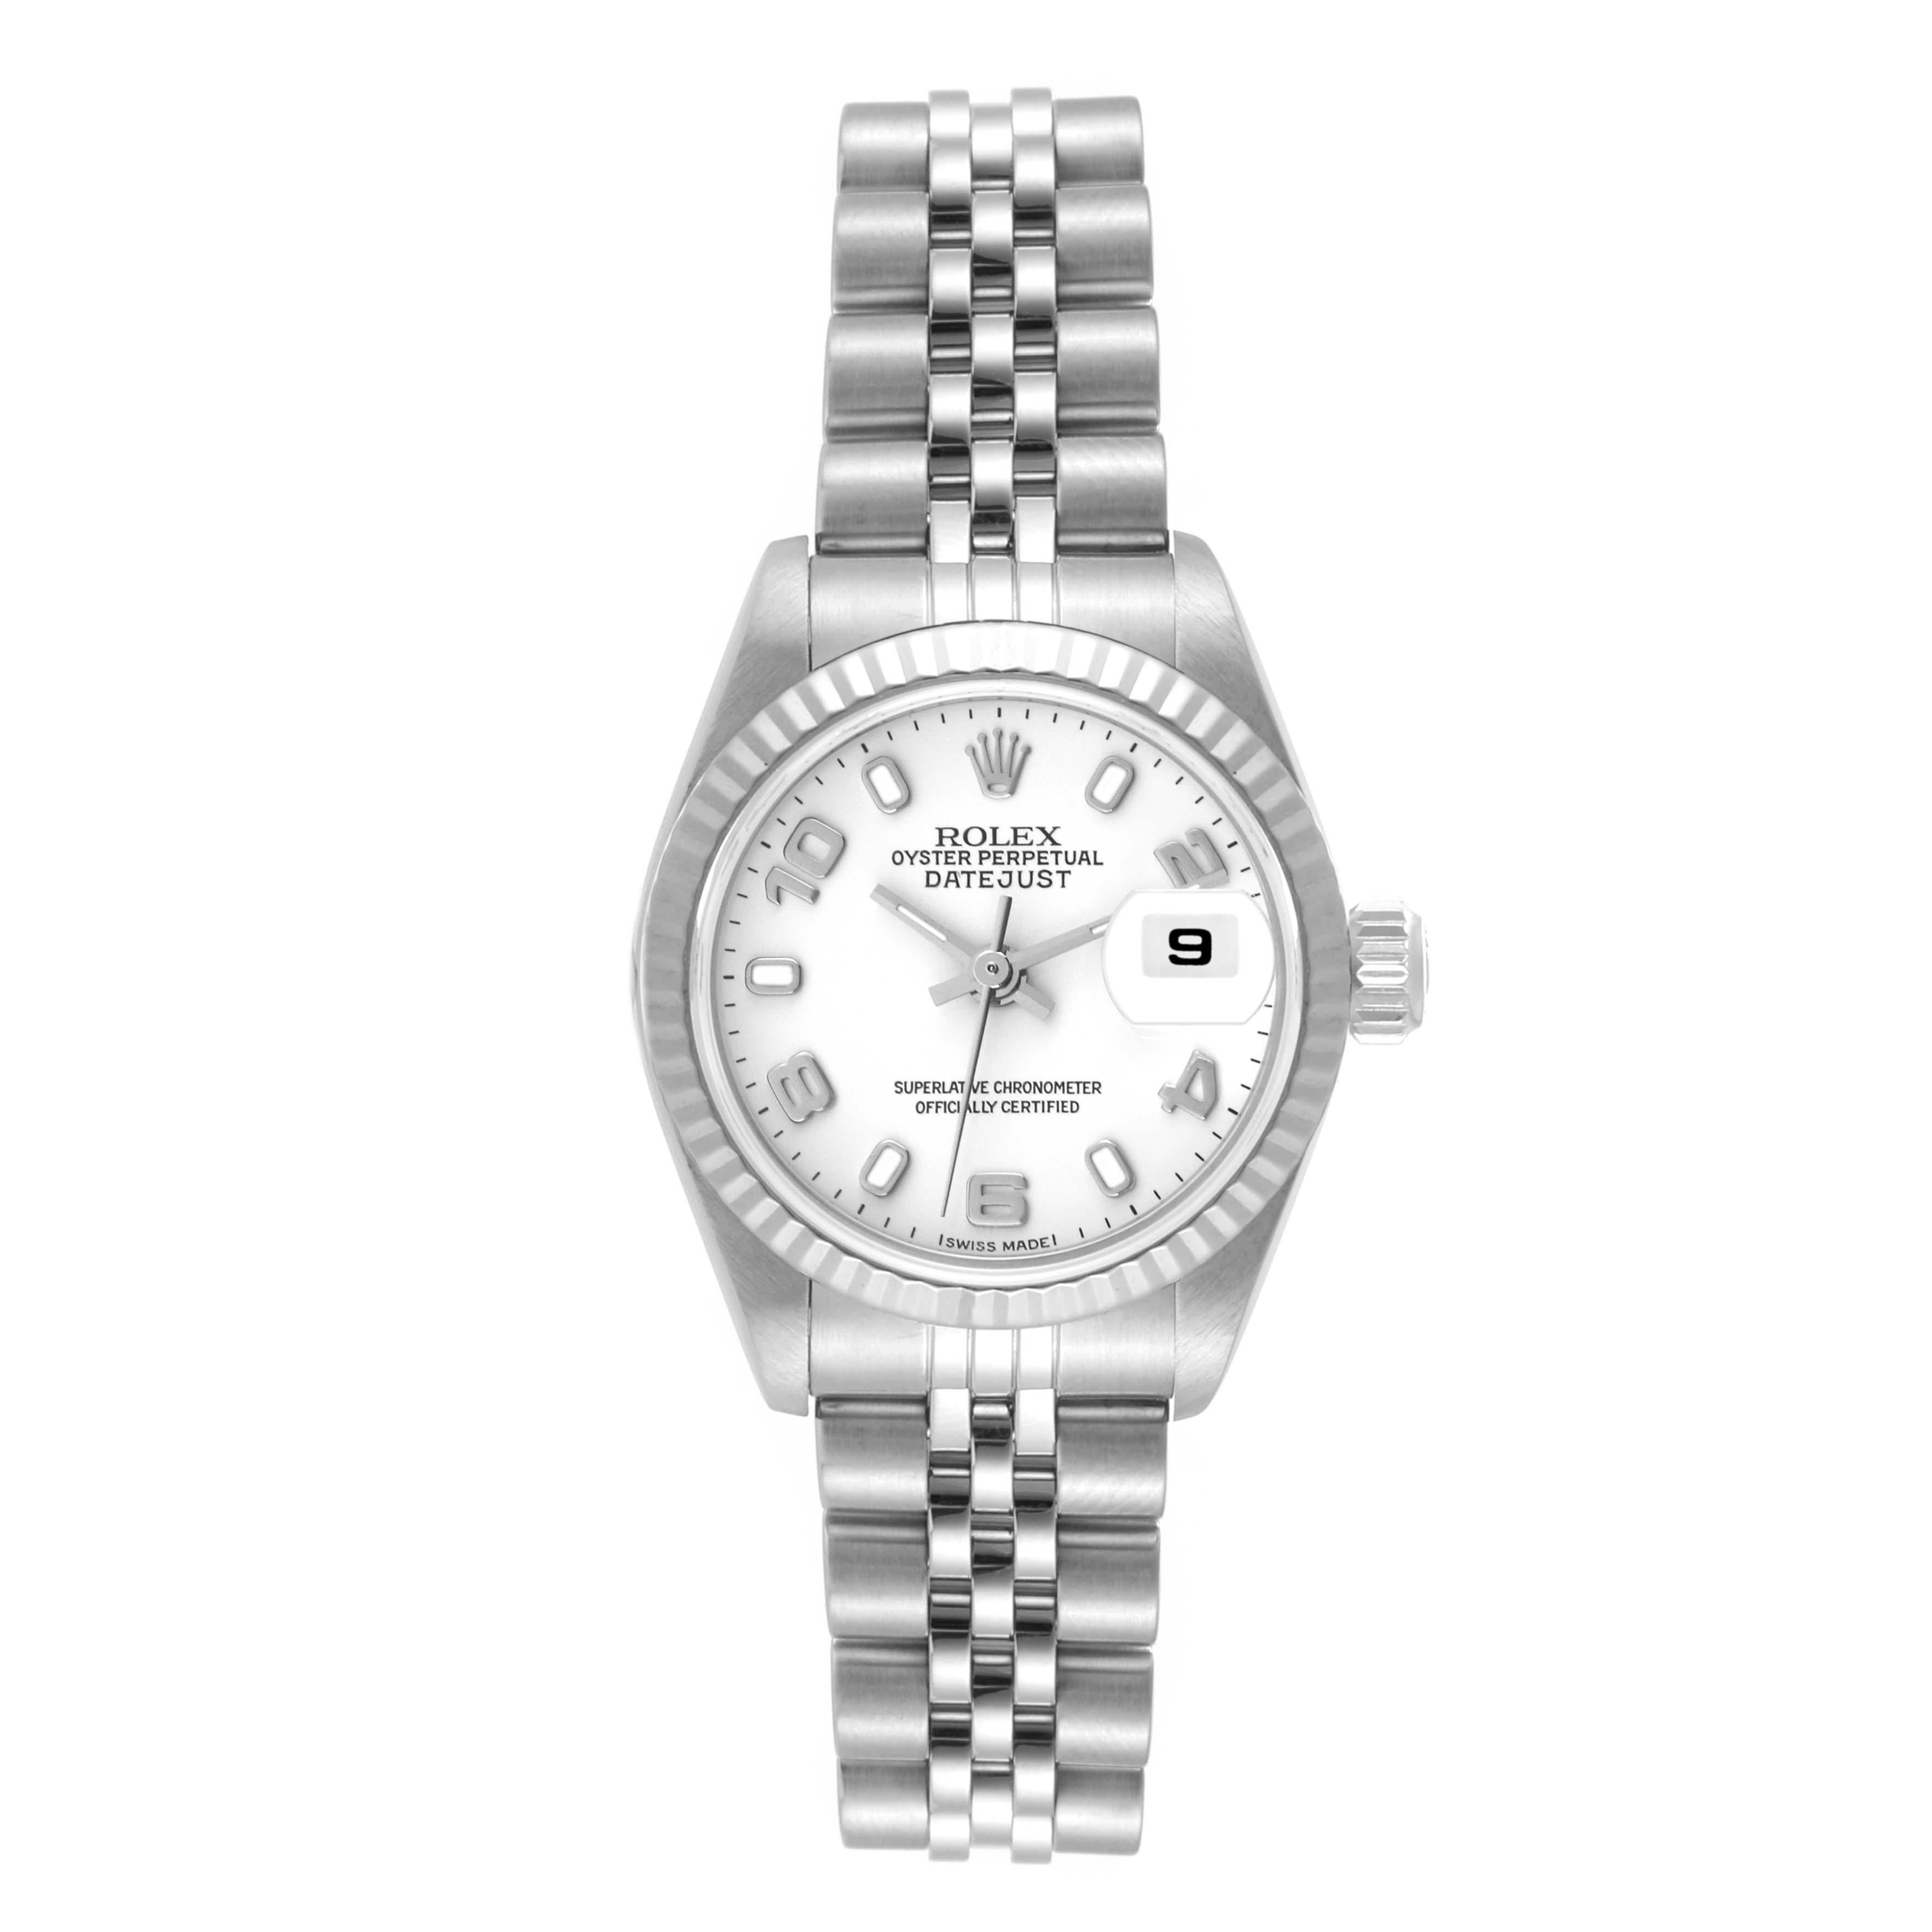 Rolex Datejust Arabic Dial White Gold Steel Ladies Watch 79174. Officially certified chronometer automatic self-winding movement. Stainless steel oyster case 26.0 mm in diameter. Rolex logo on the crown. 18K white gold fluted bezel. Scratch